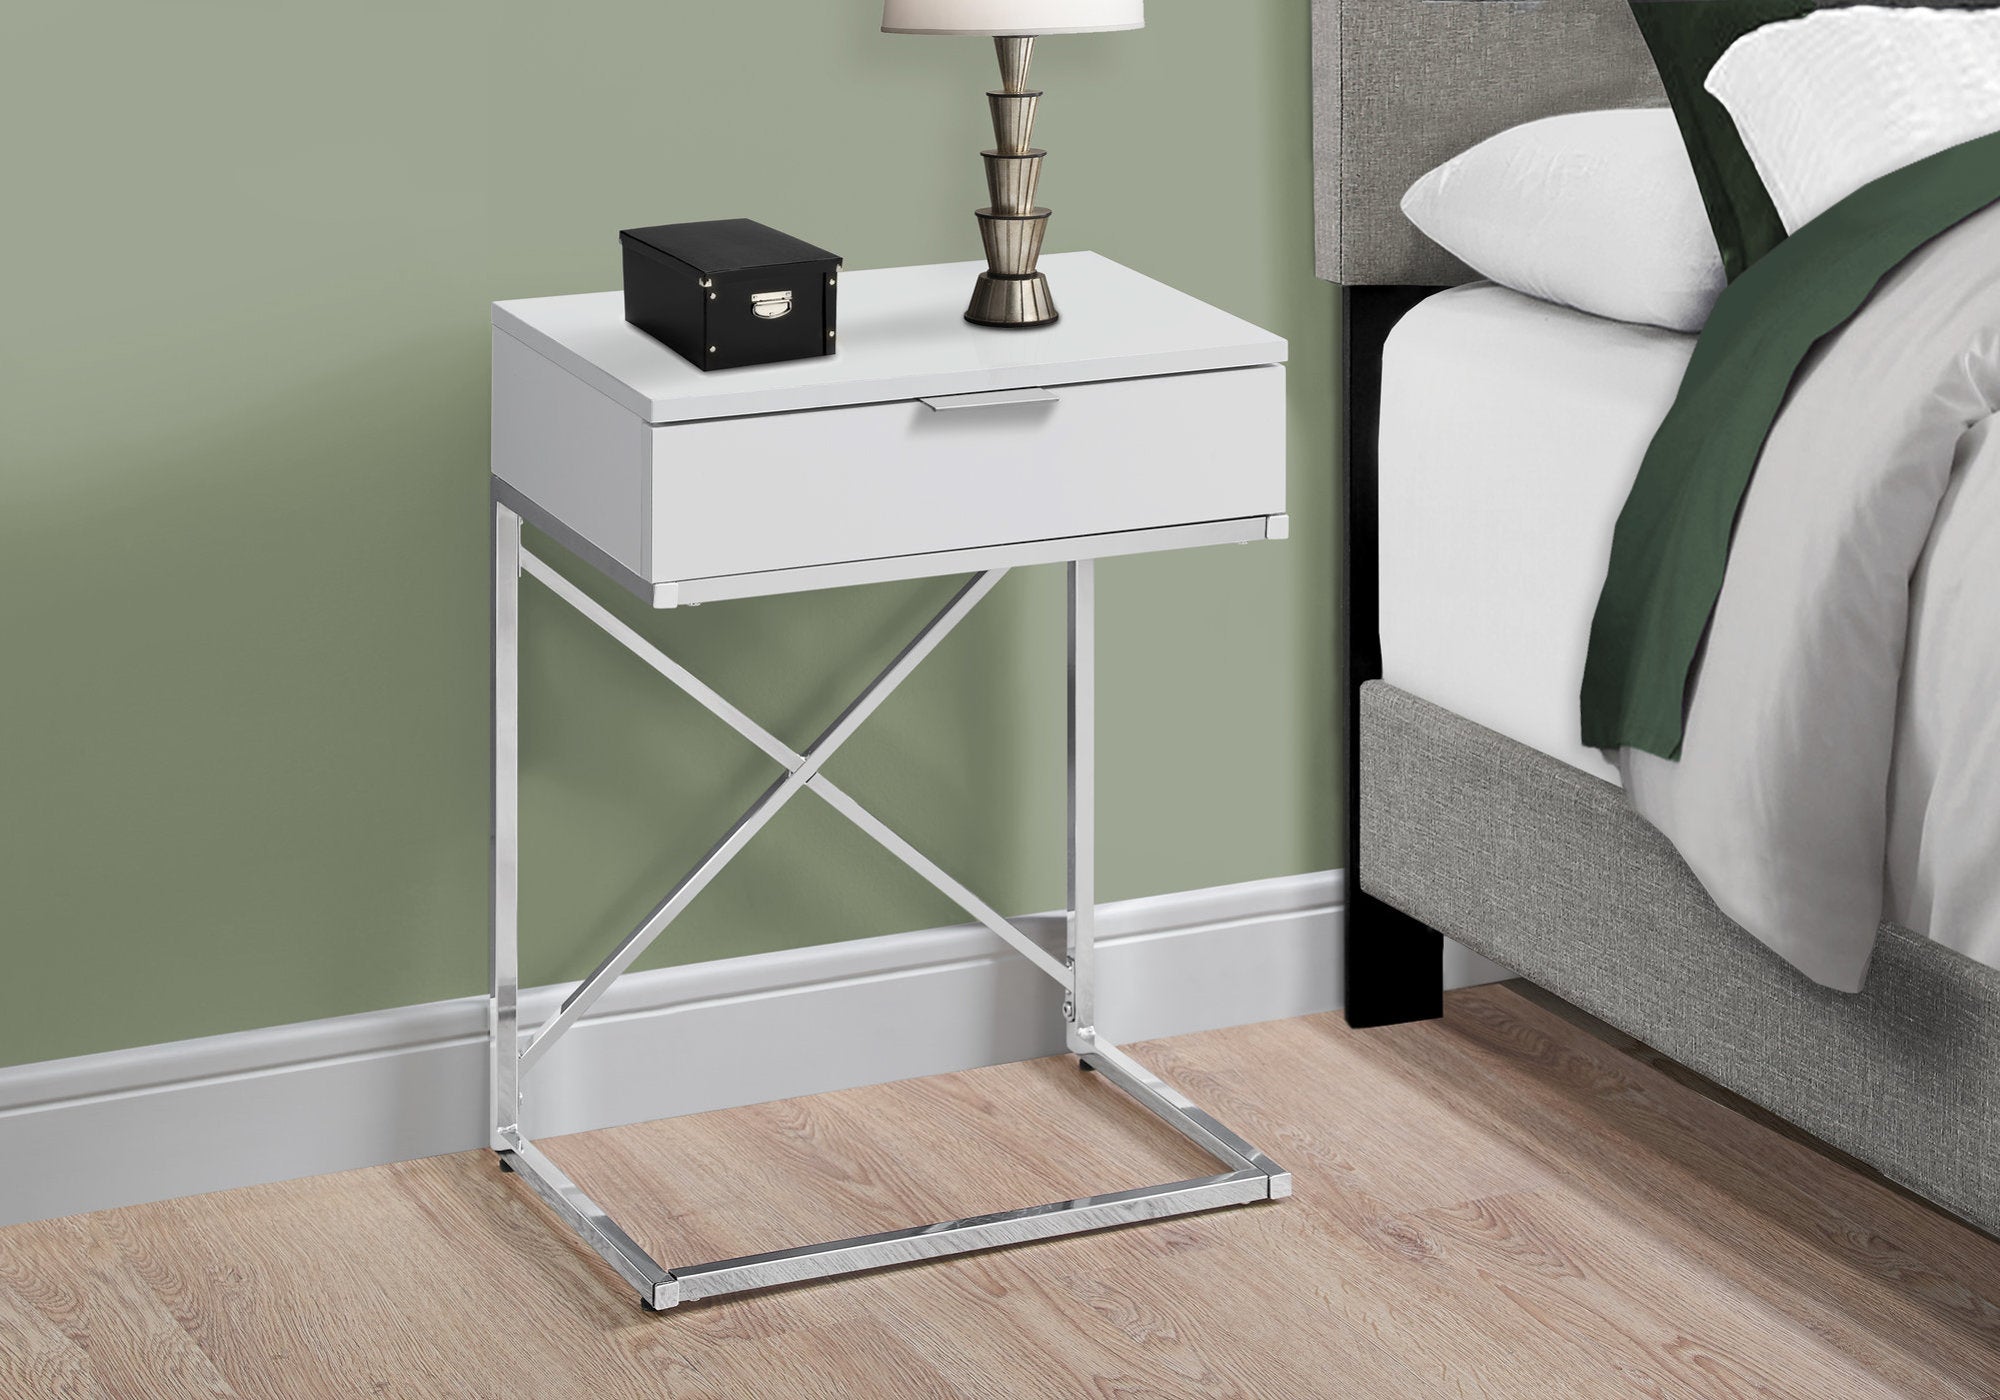 MN-803470    Accent Table, Side, End, Nightstand, Lamp, Living Room, Bedroom, Metal Legs, Laminate, Glossy White, Chrome, Contemporary, Modern